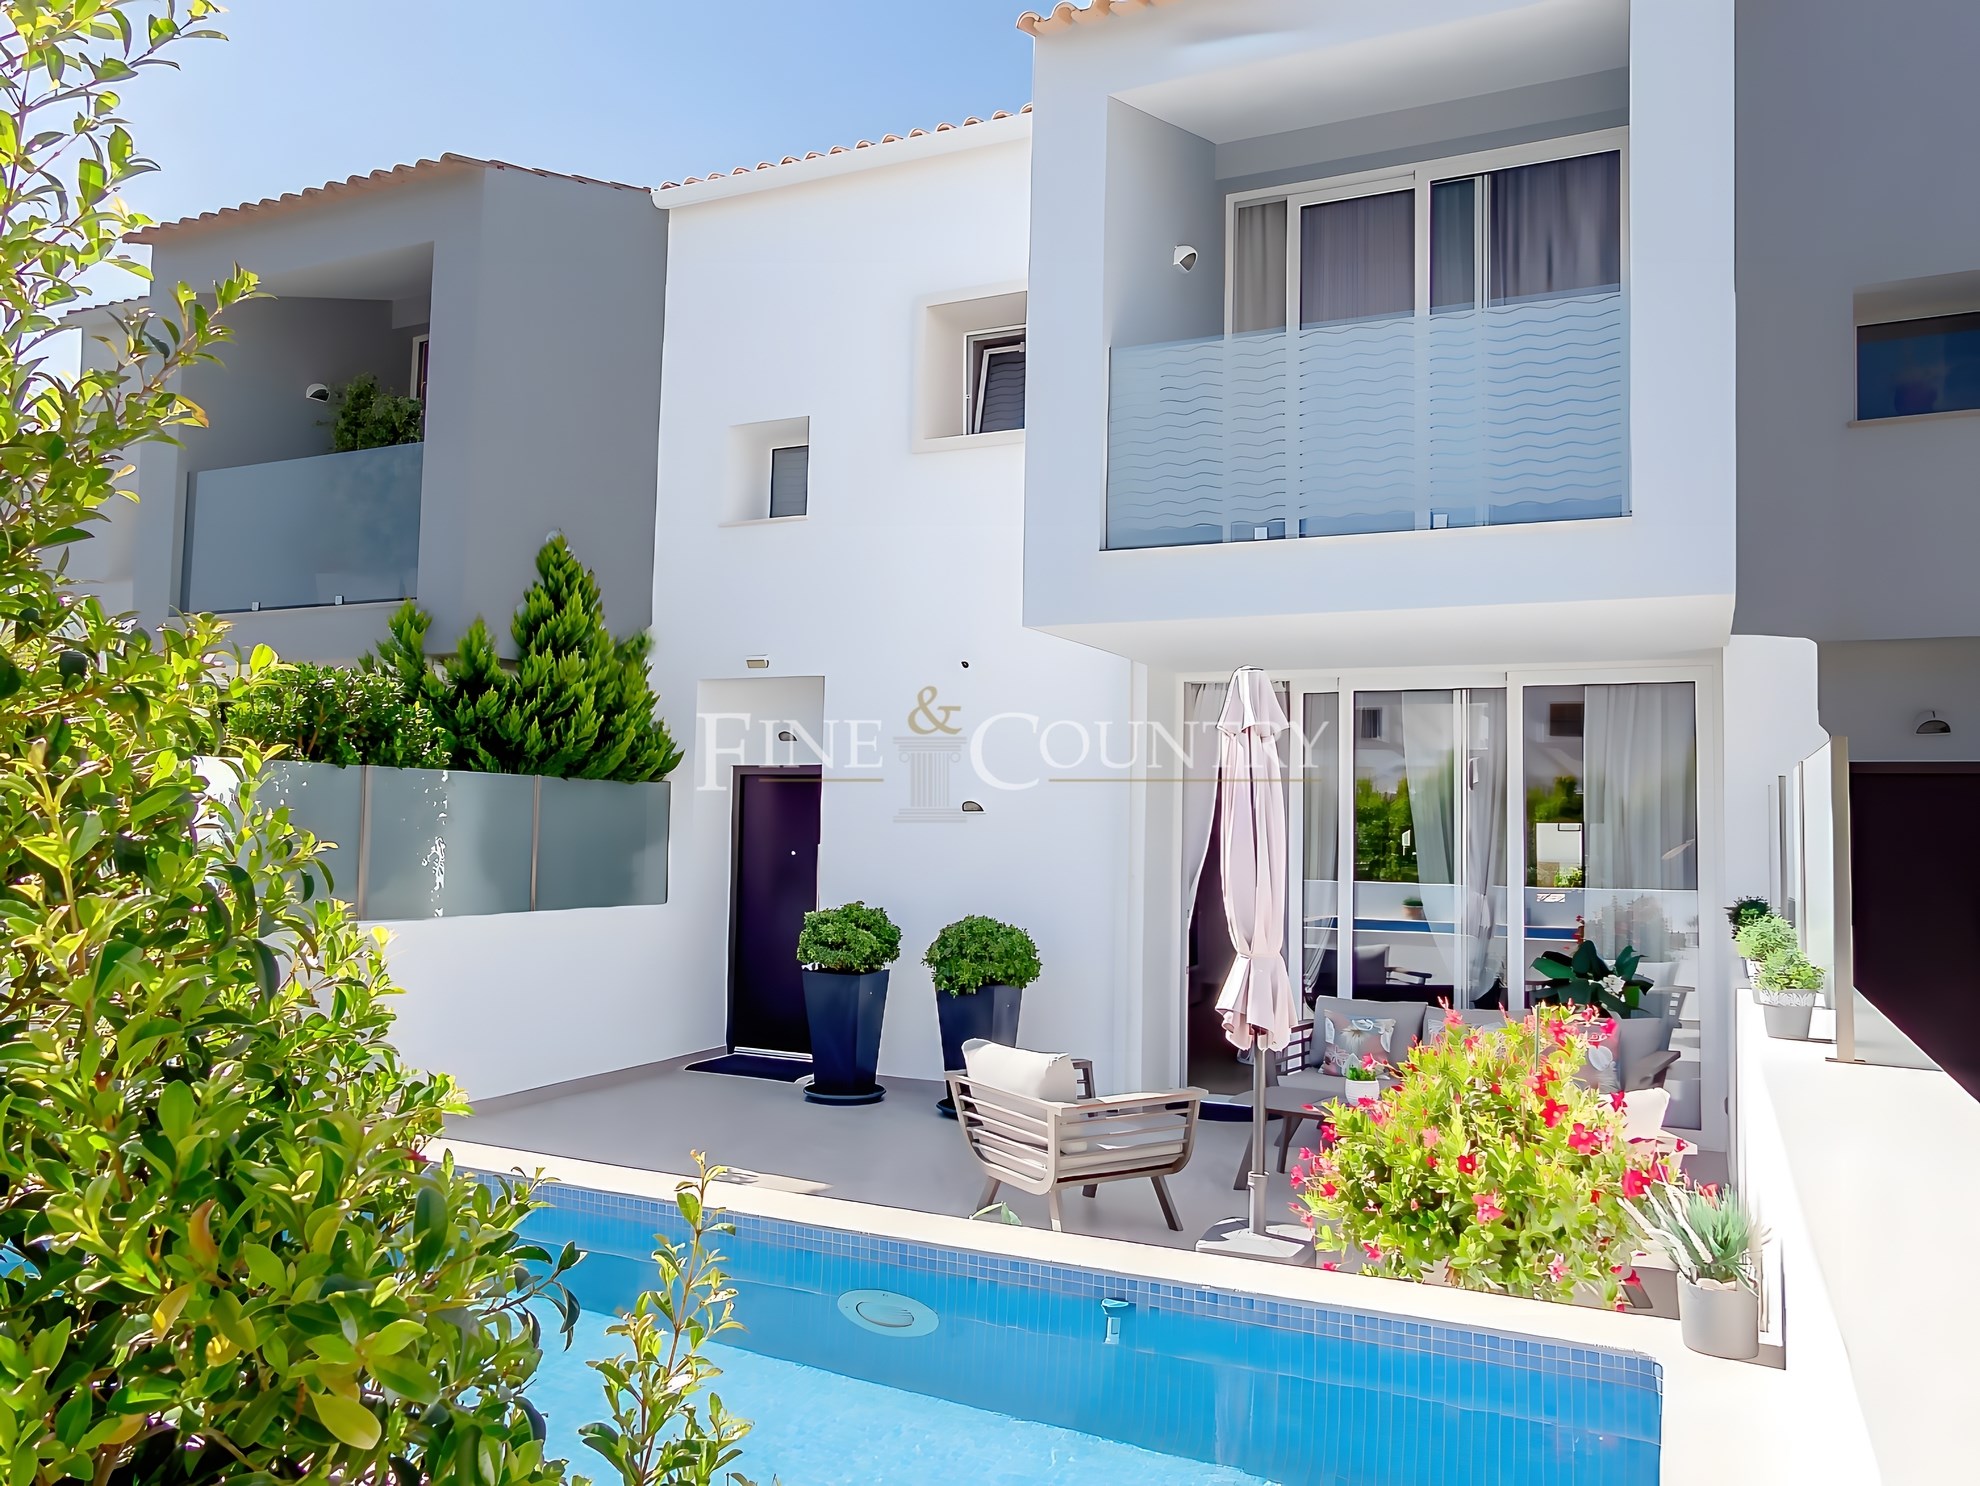 Albufeira - Magnificent 3+1 -bedroom semi-detached villa with swimming pool and private garage Accommodation in Albufeira